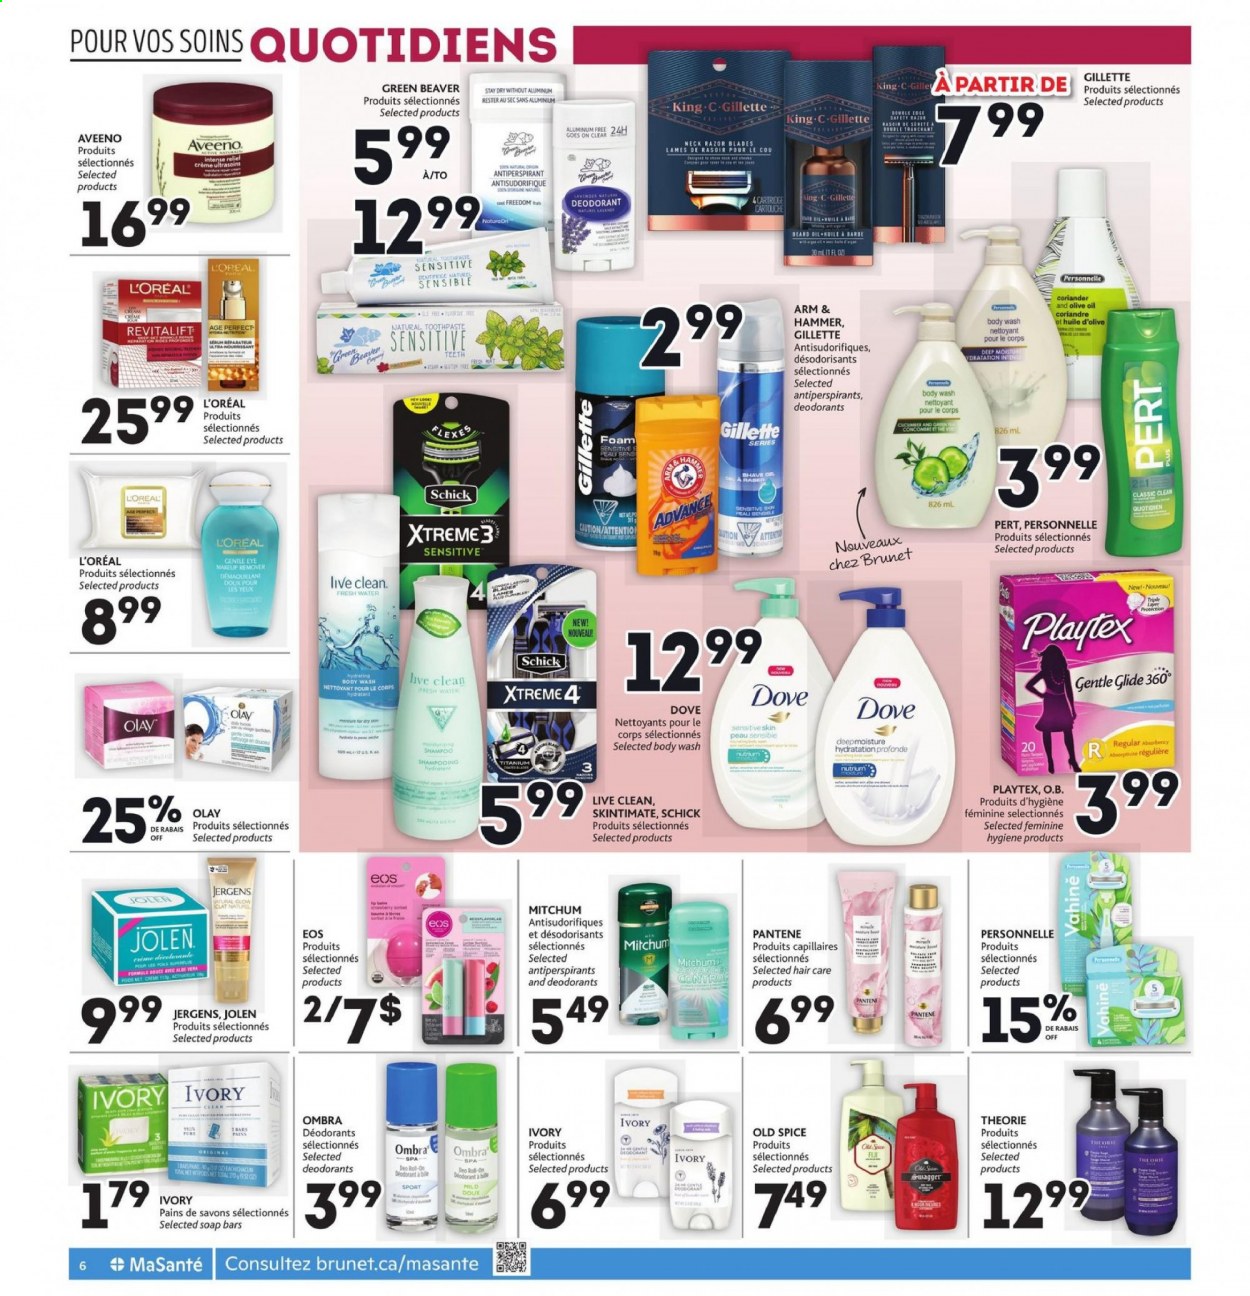 thumbnail - Brunet Flyer - April 15, 2021 - April 21, 2021 - Sales products - Aveeno, ARM & HAMMER, body wash, soap, toothpaste, Playtex, L’Oréal, Olay, Jergens, anti-perspirant, razor, Schick, makeup remover, Gillette, shampoo, Pantene, Old Spice, deodorant. Page 4.